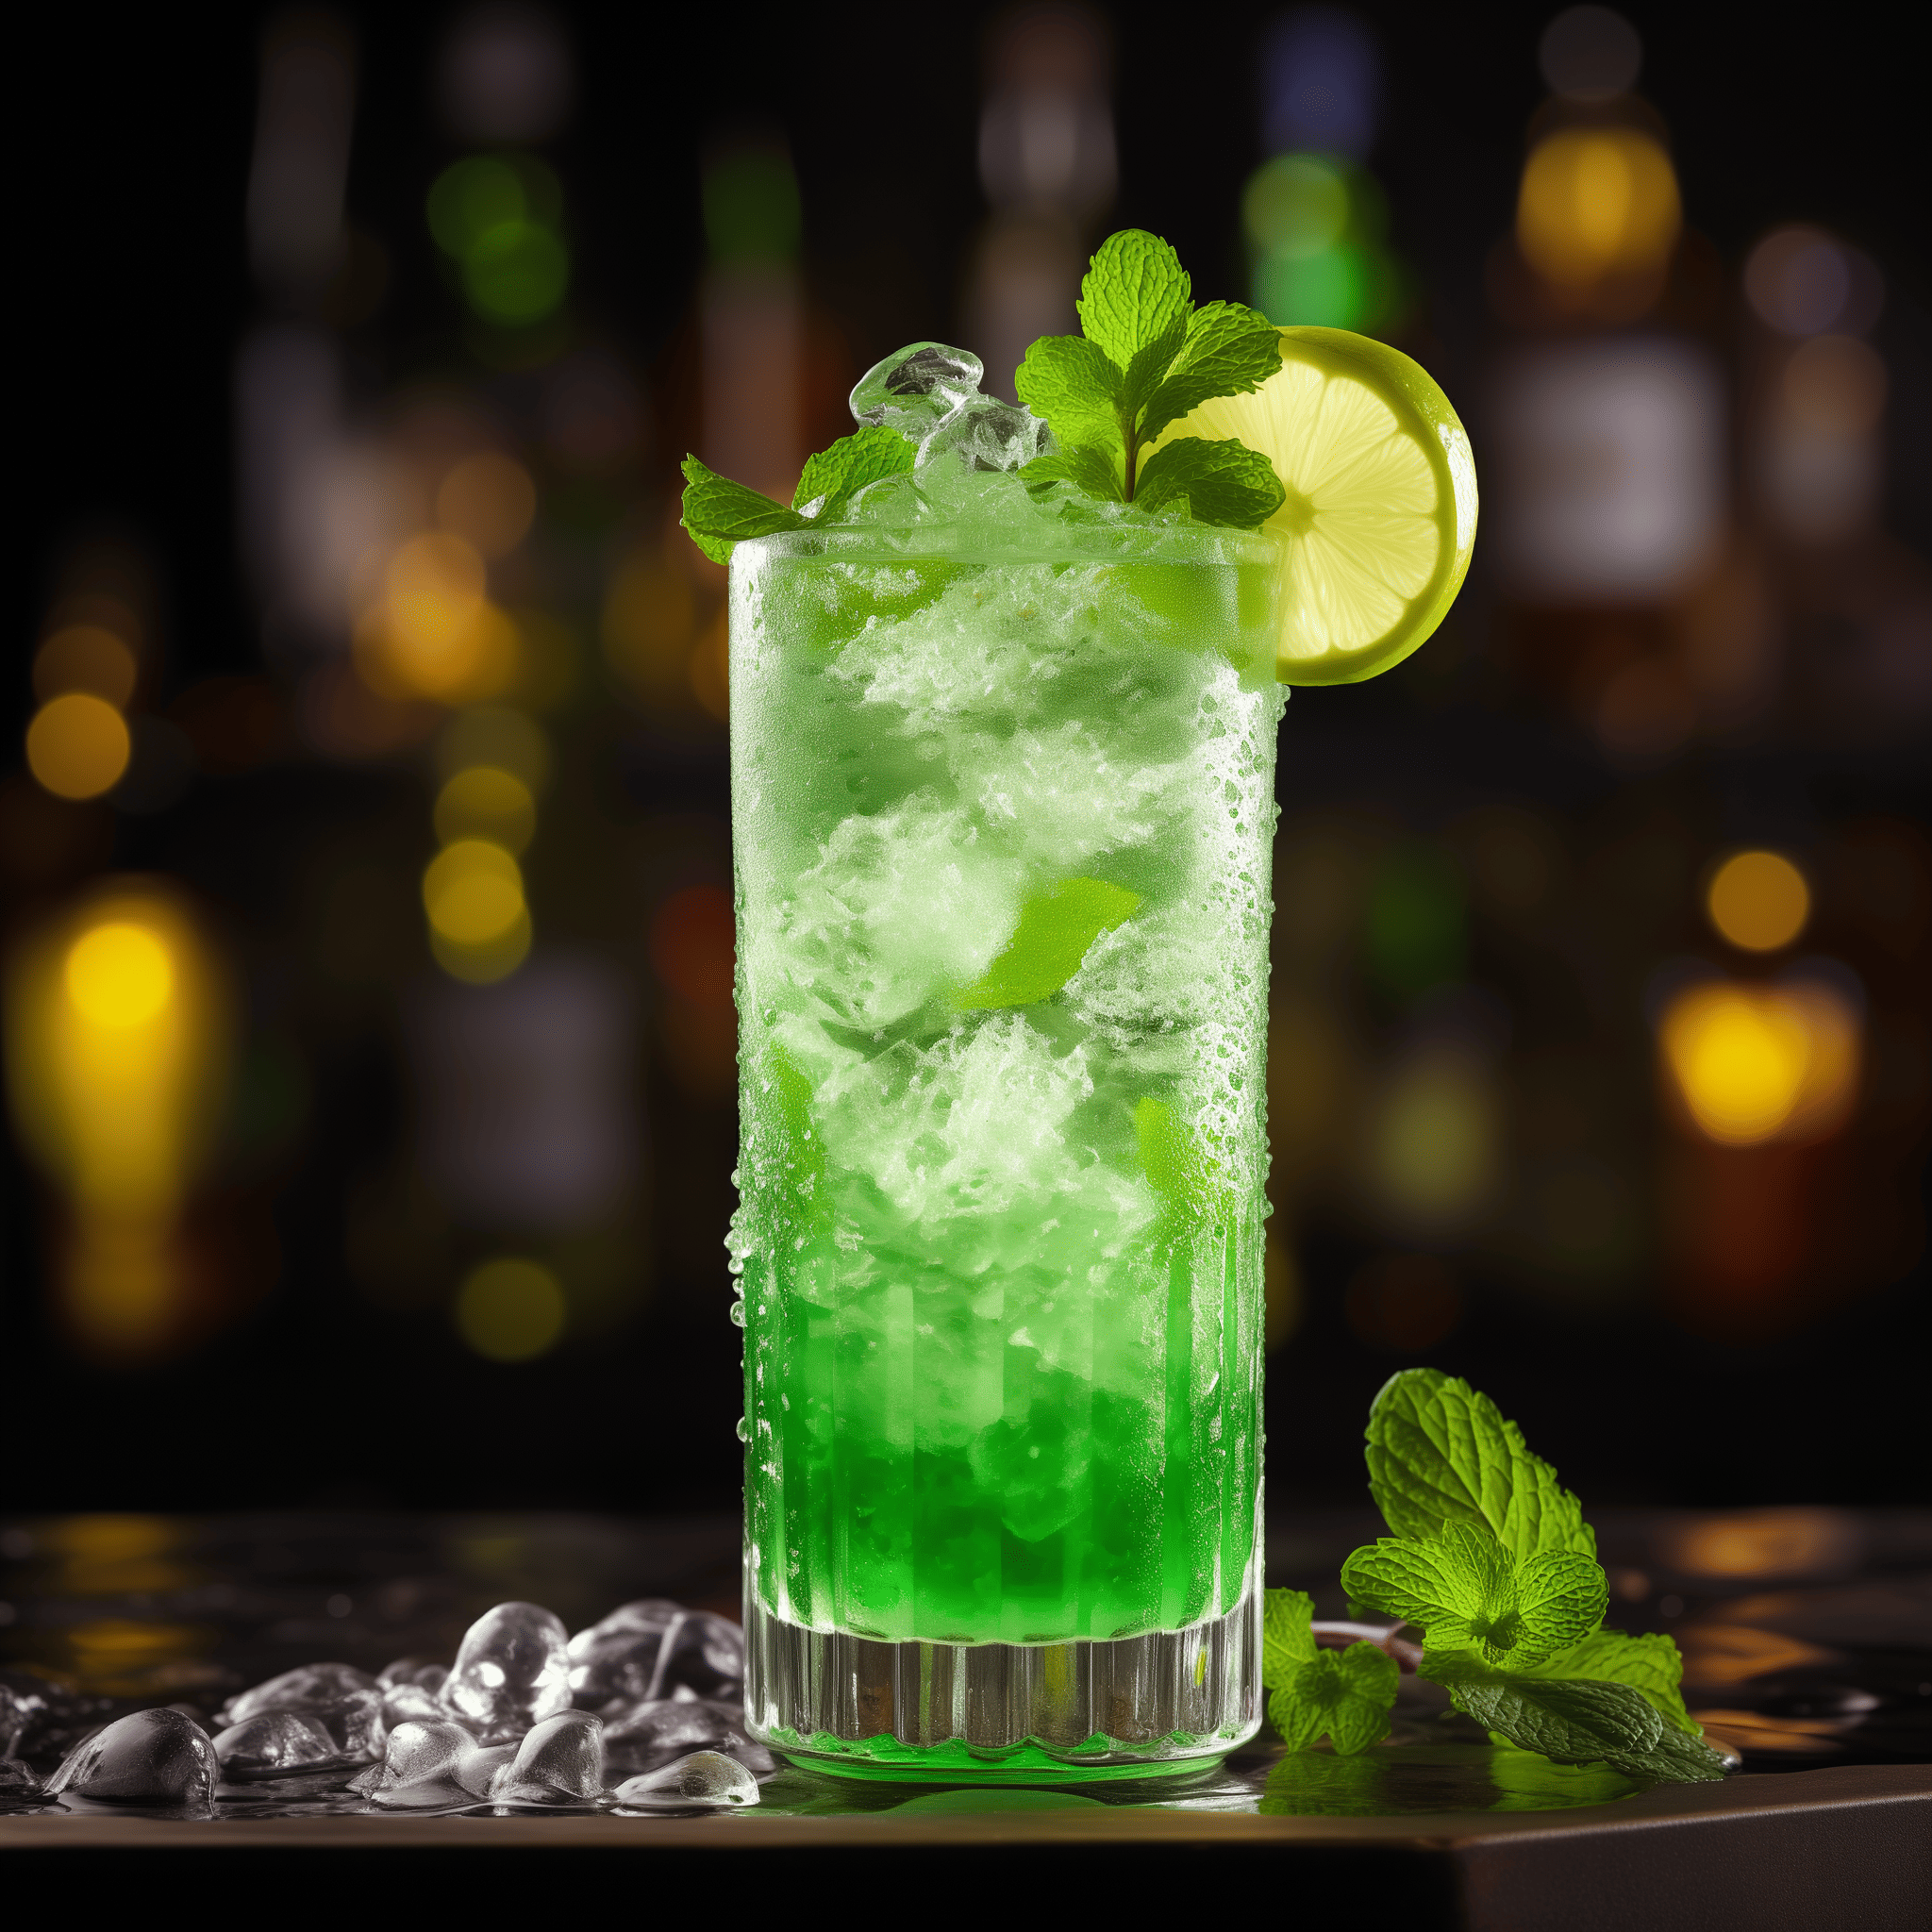 Money Rush Cocktail Recipe - The Money Rush cocktail is a complex blend of flavors. It's a strong, vibrant mix with a sweet and slightly herbal undertone. The effervescence from the soda gives it a refreshing kick, perfect for a celebratory toast.